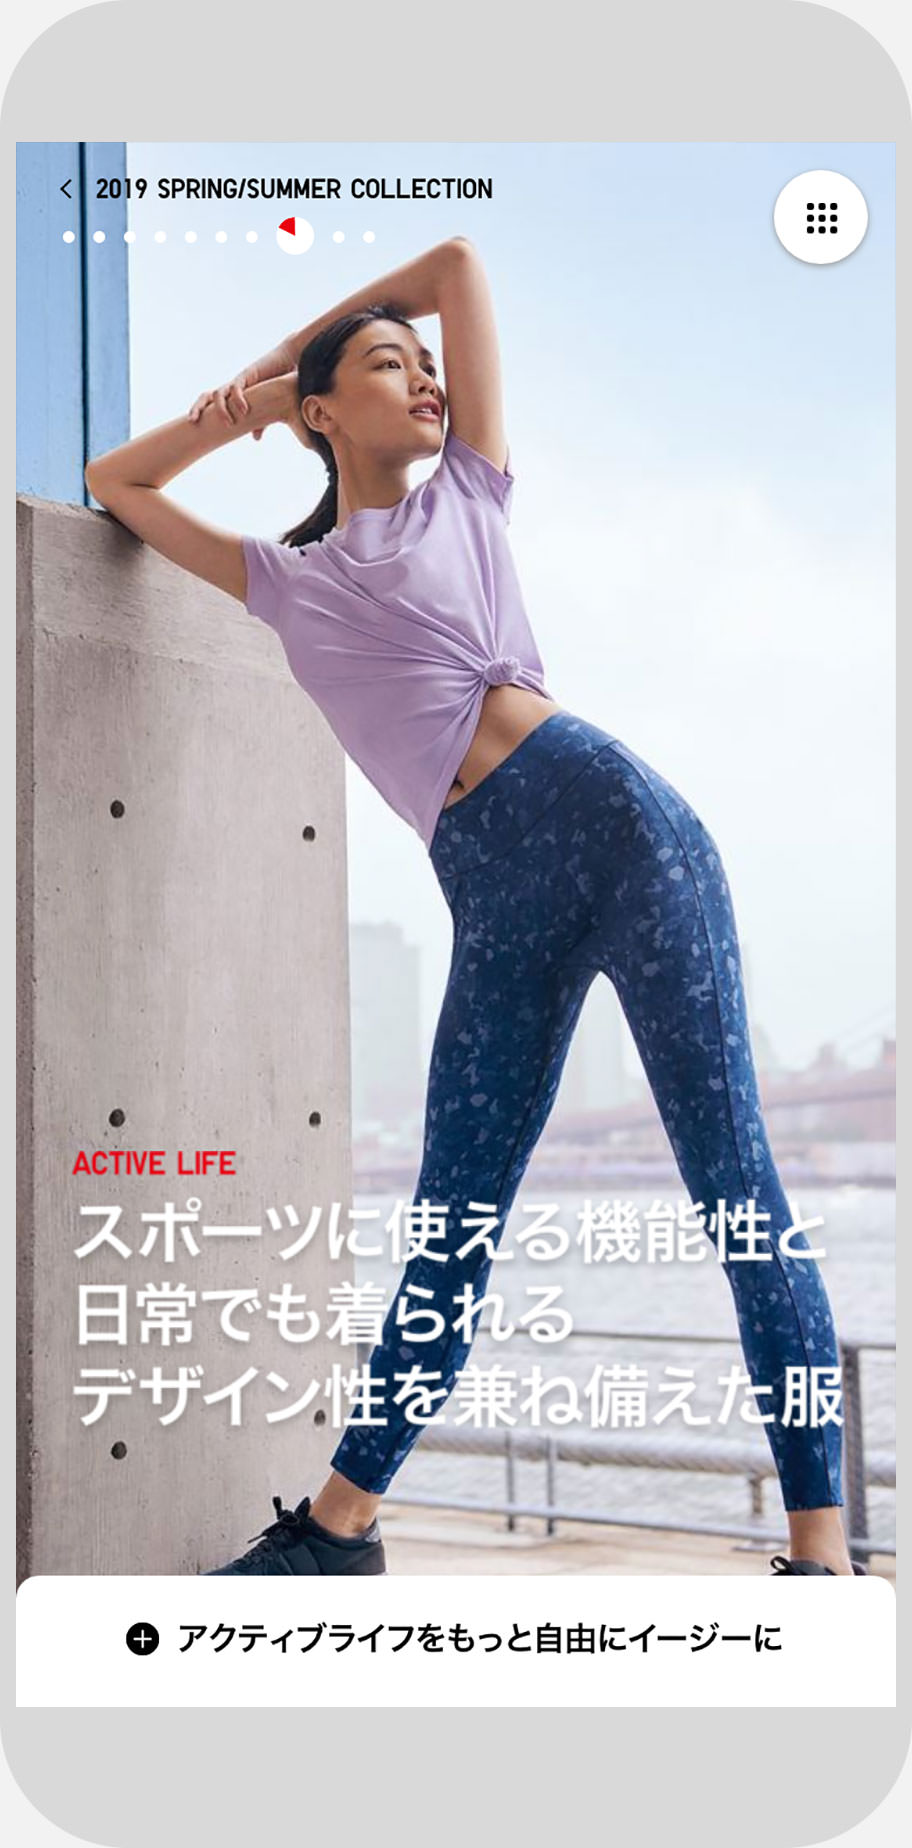 UNIQLO 2019 SPRING/SUMMER Collection